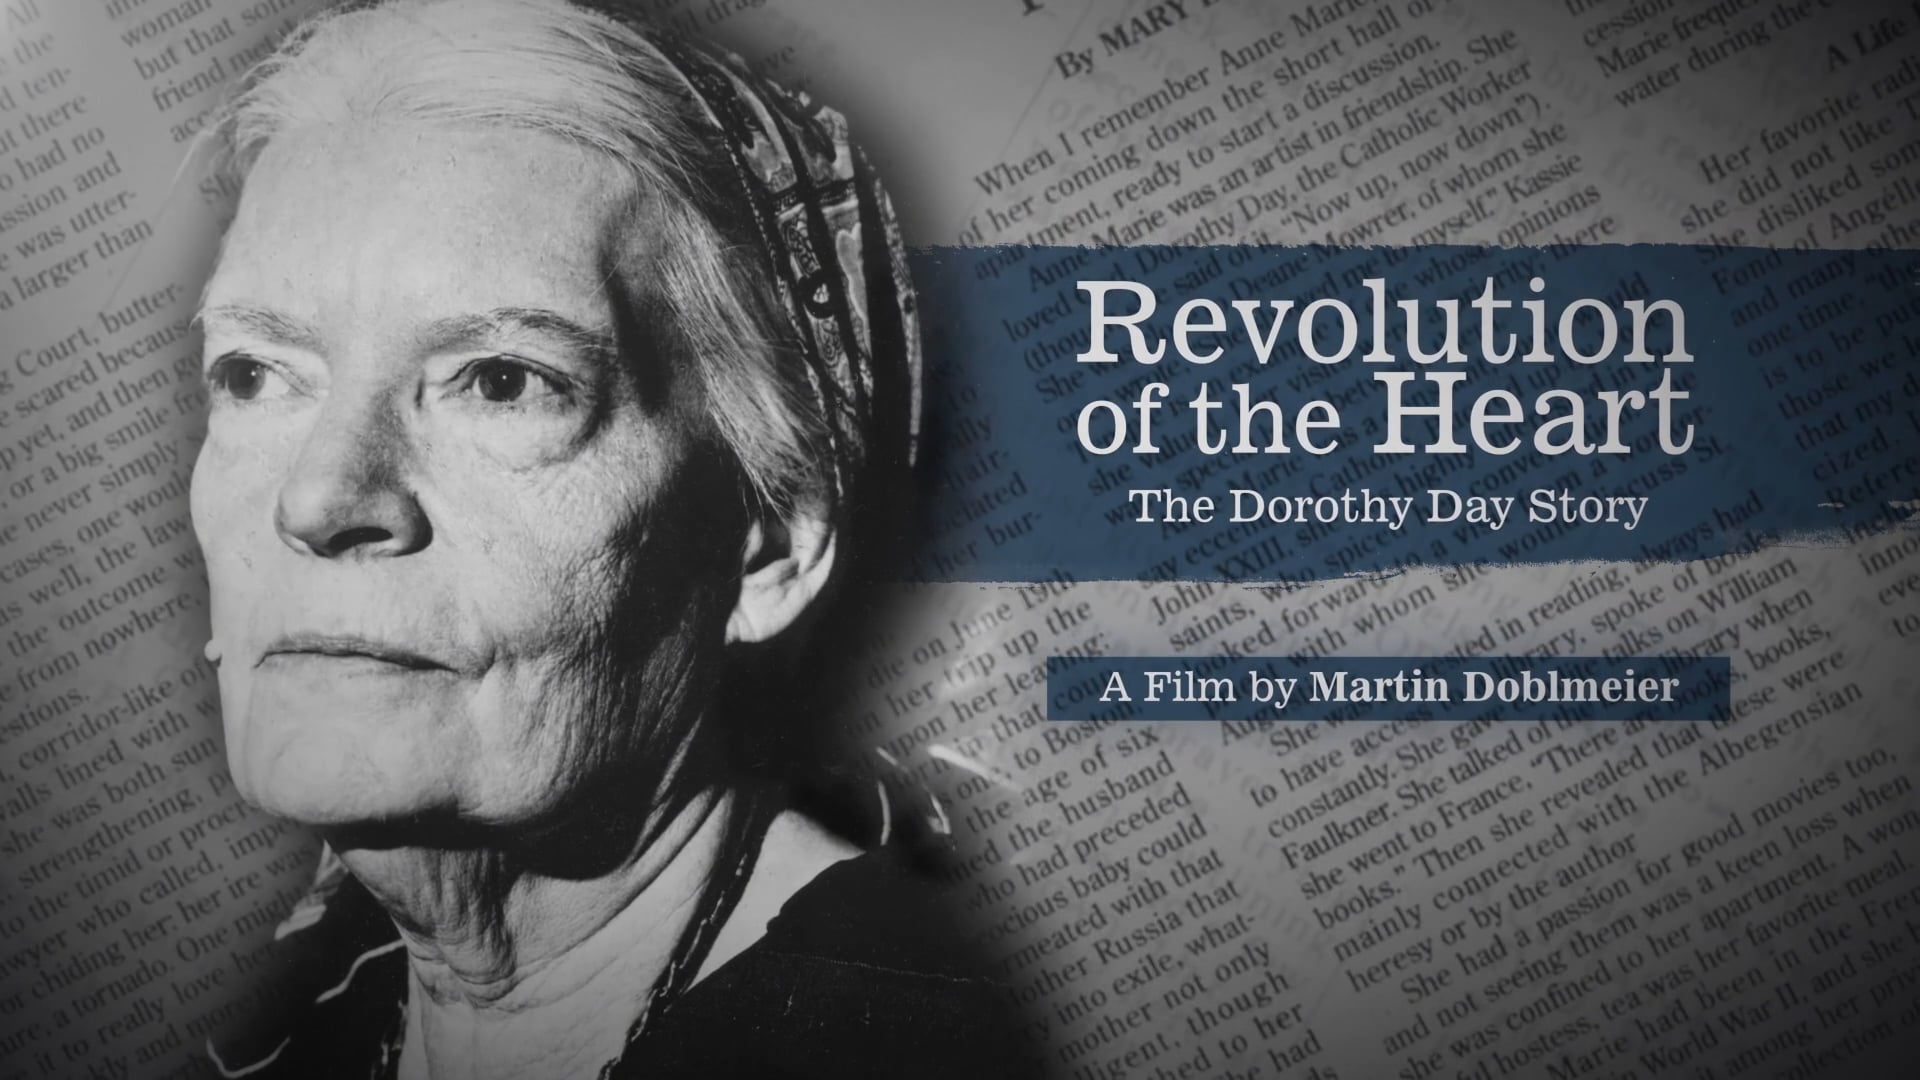 Watch Revolution of the Heart The Dorothy Day Story Online Vimeo On Demand on Vimeo